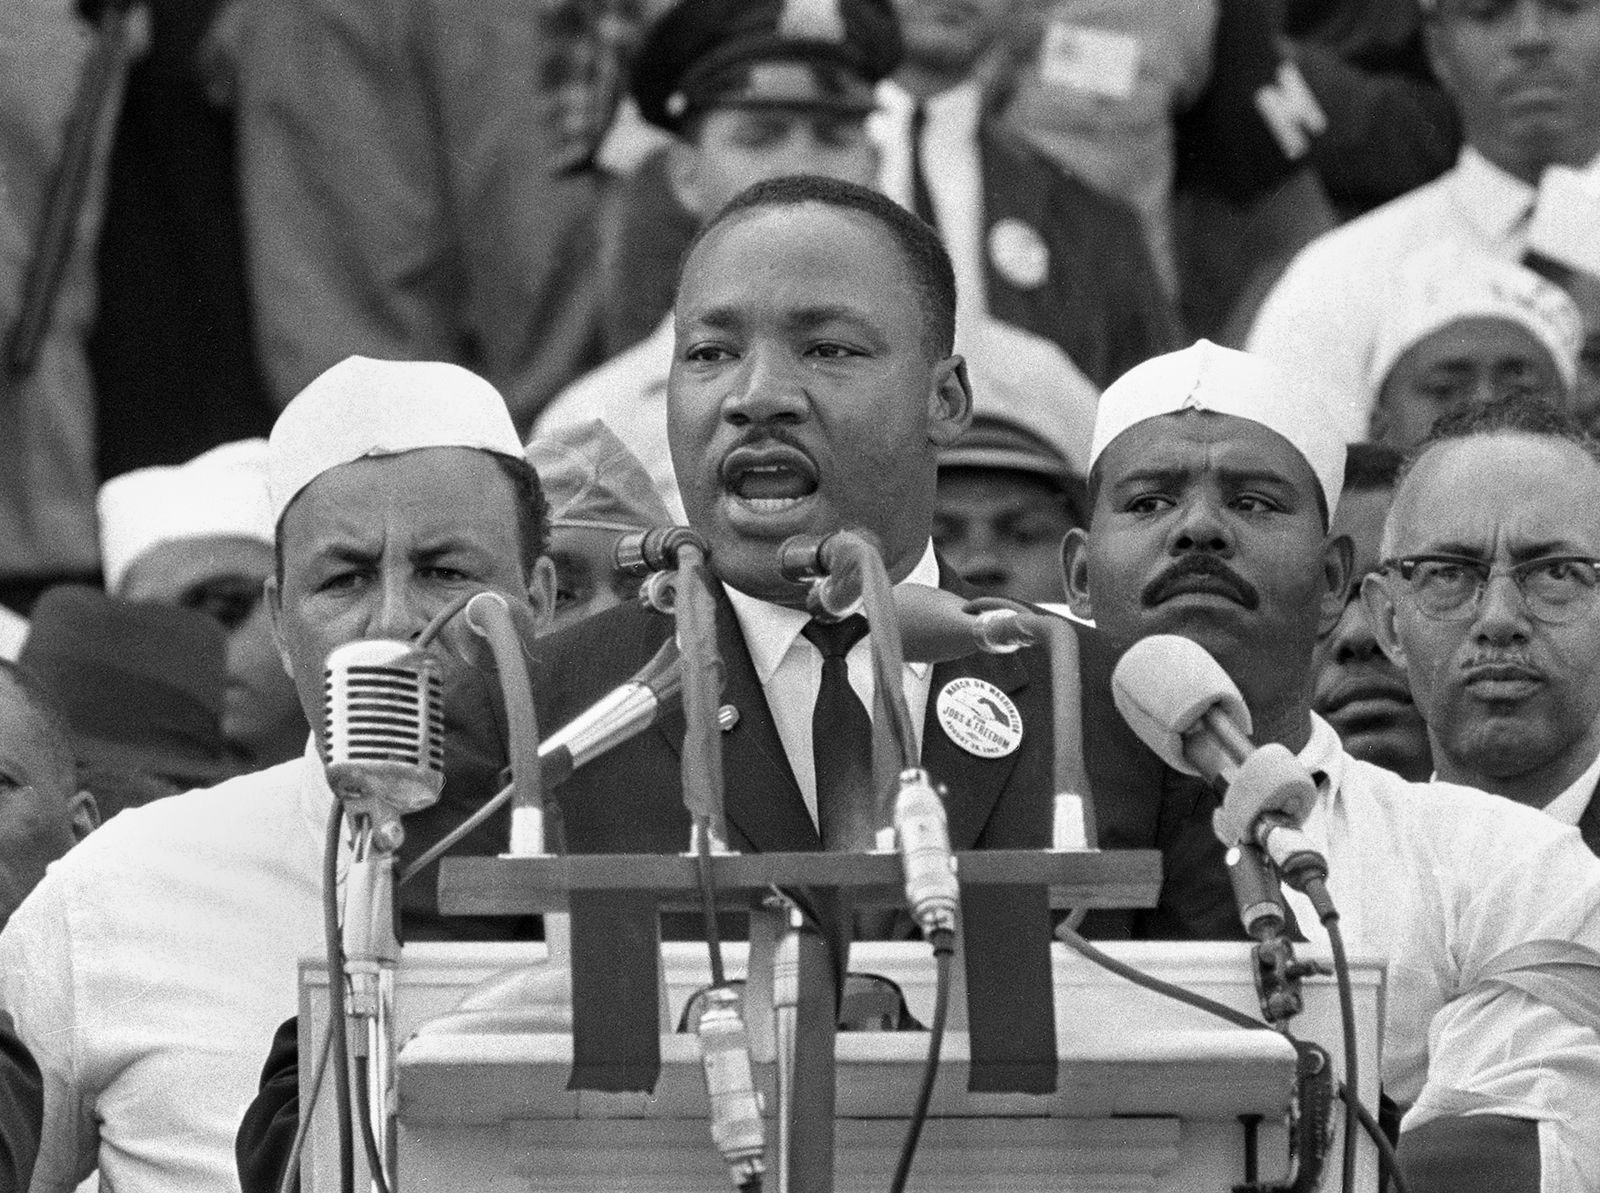 FILE- In this Aug. 28, 1963, black-and-white file photo Dr. Martin Luther King Jr. addresses marchers during his "I Have a Dream" speech at the Lincoln Memorial in Washington. (AP Photo/File)